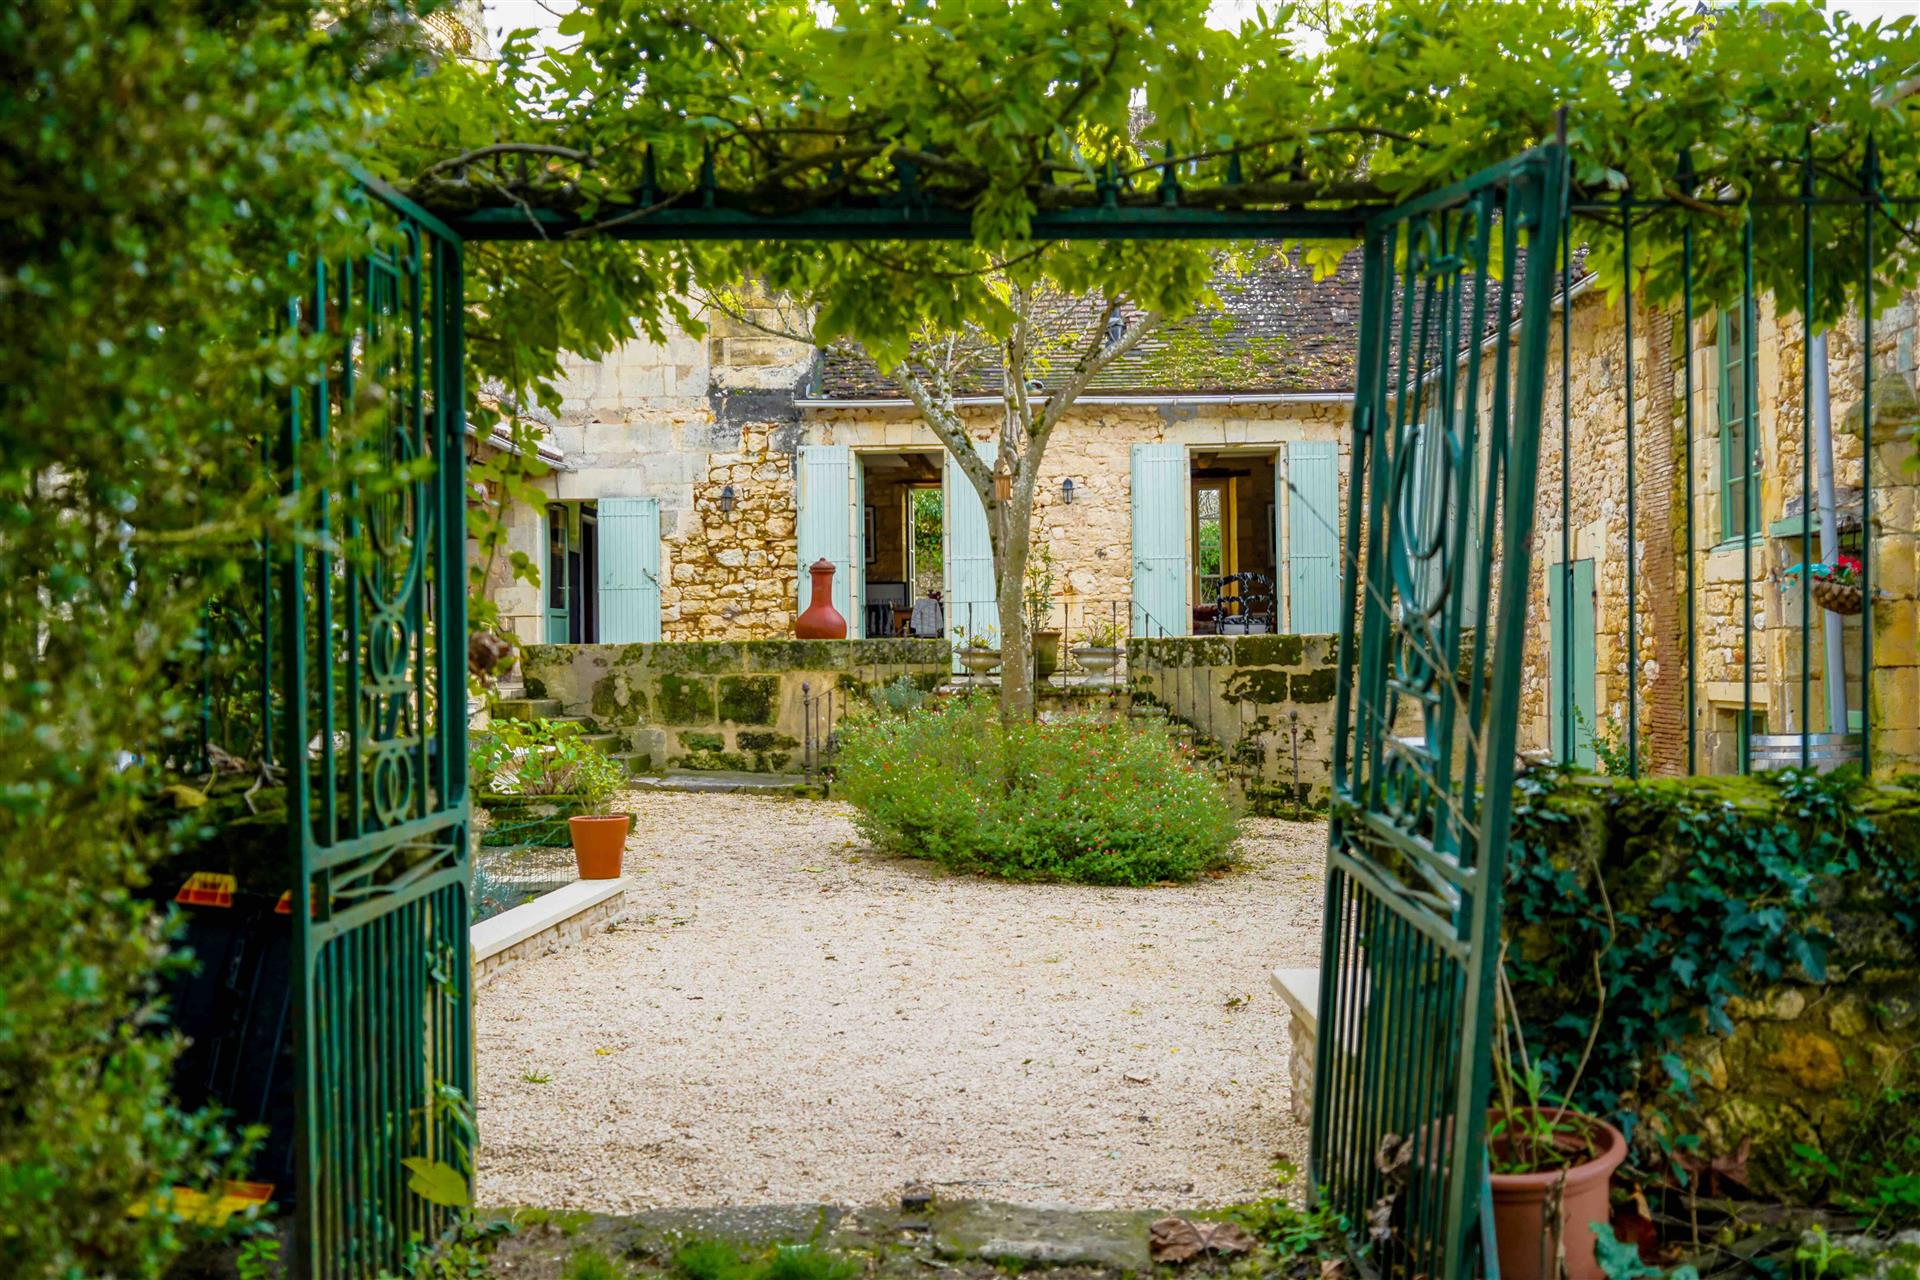 Character property in bastide